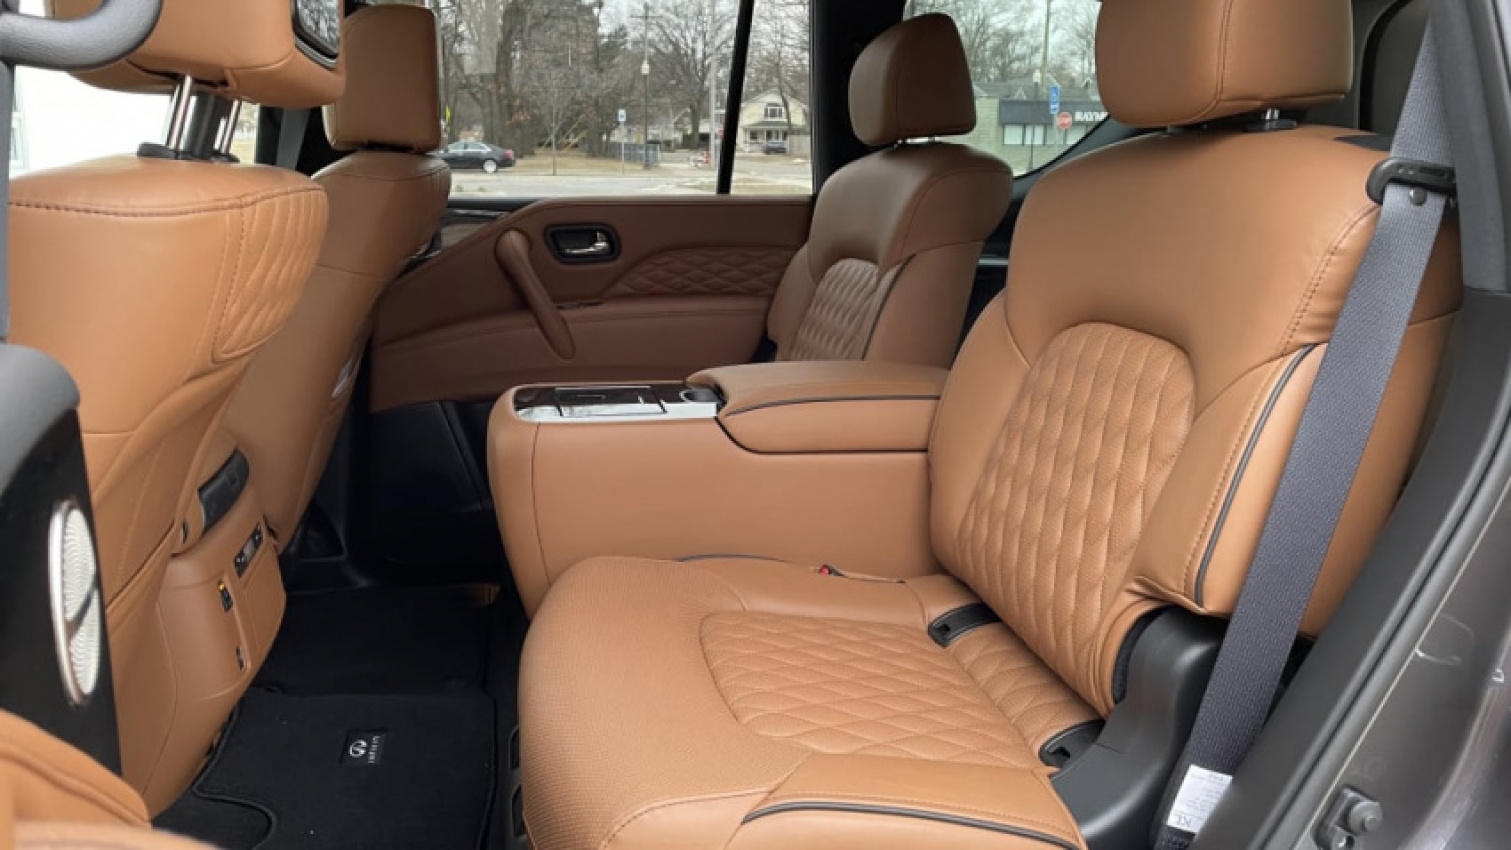 autos, cars, infiniti, android, driveway tests, infiniti qx80, infotainment, luxury, technology, android, 2022 infiniti qx80 interior review | refreshed, but still behind